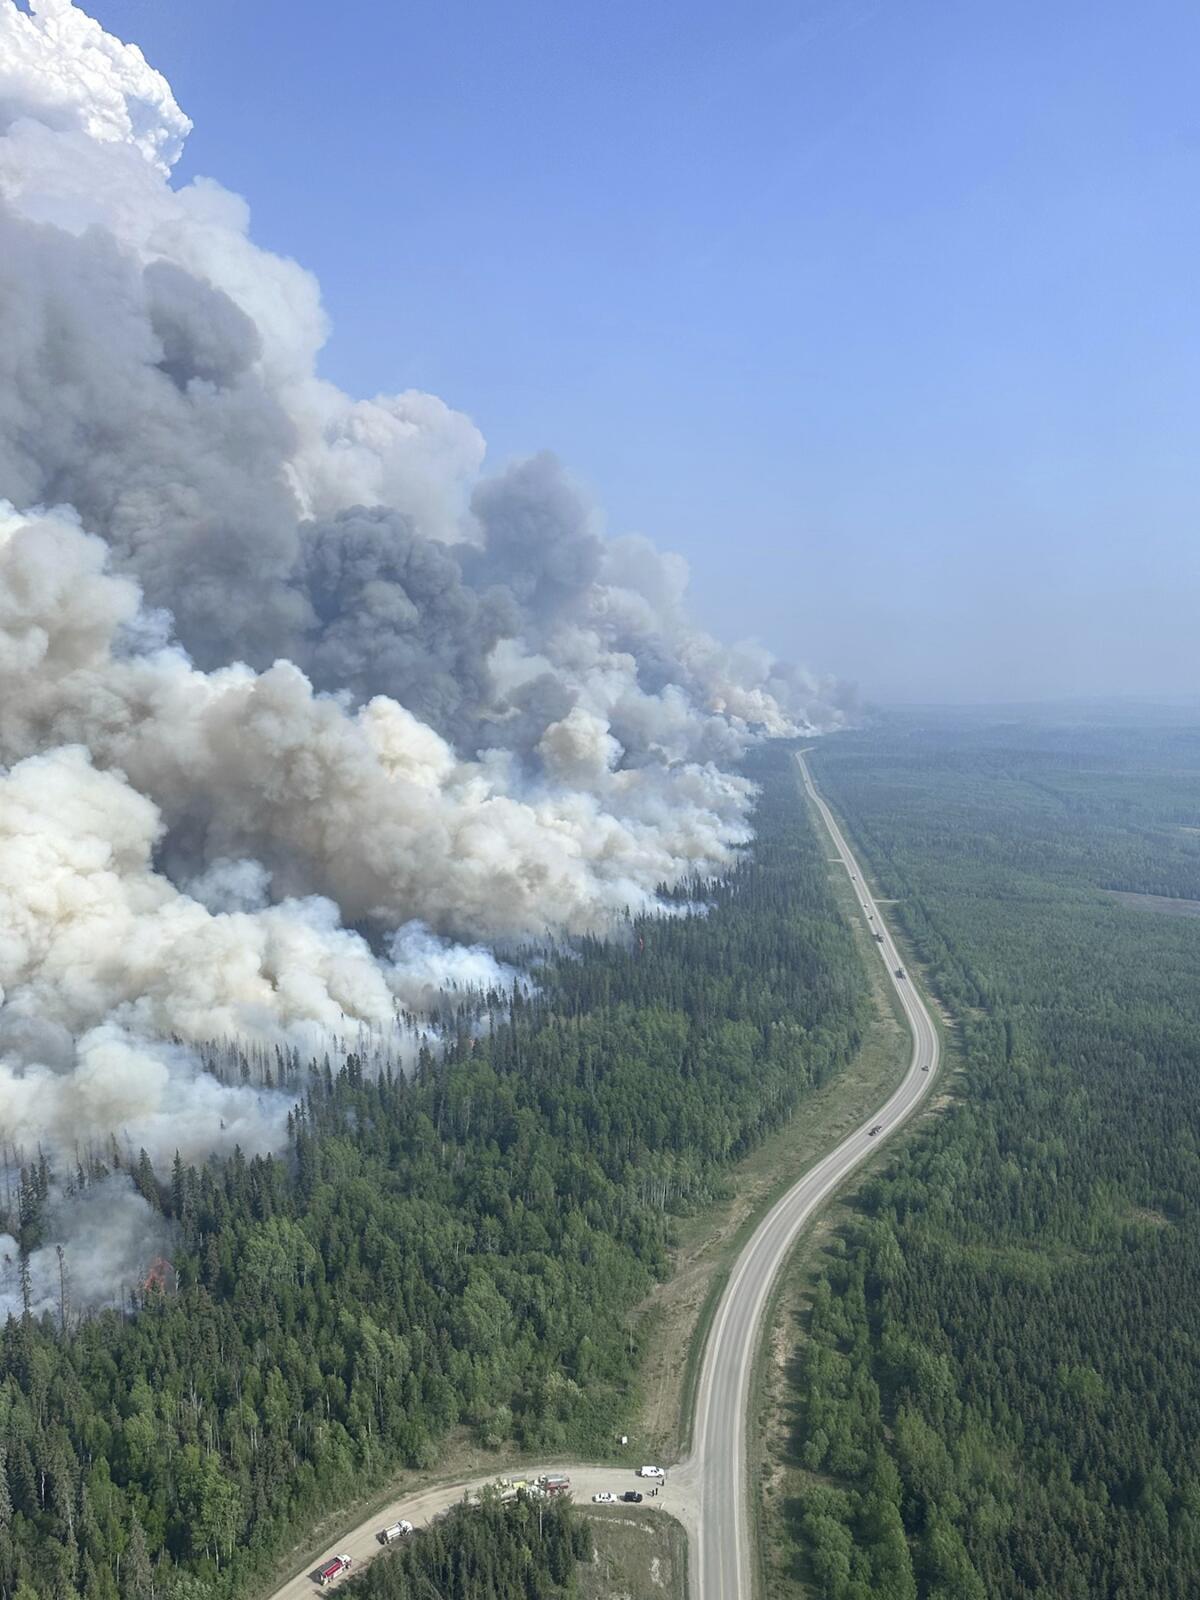 Smoke billows above a forested area with a roadway running through it